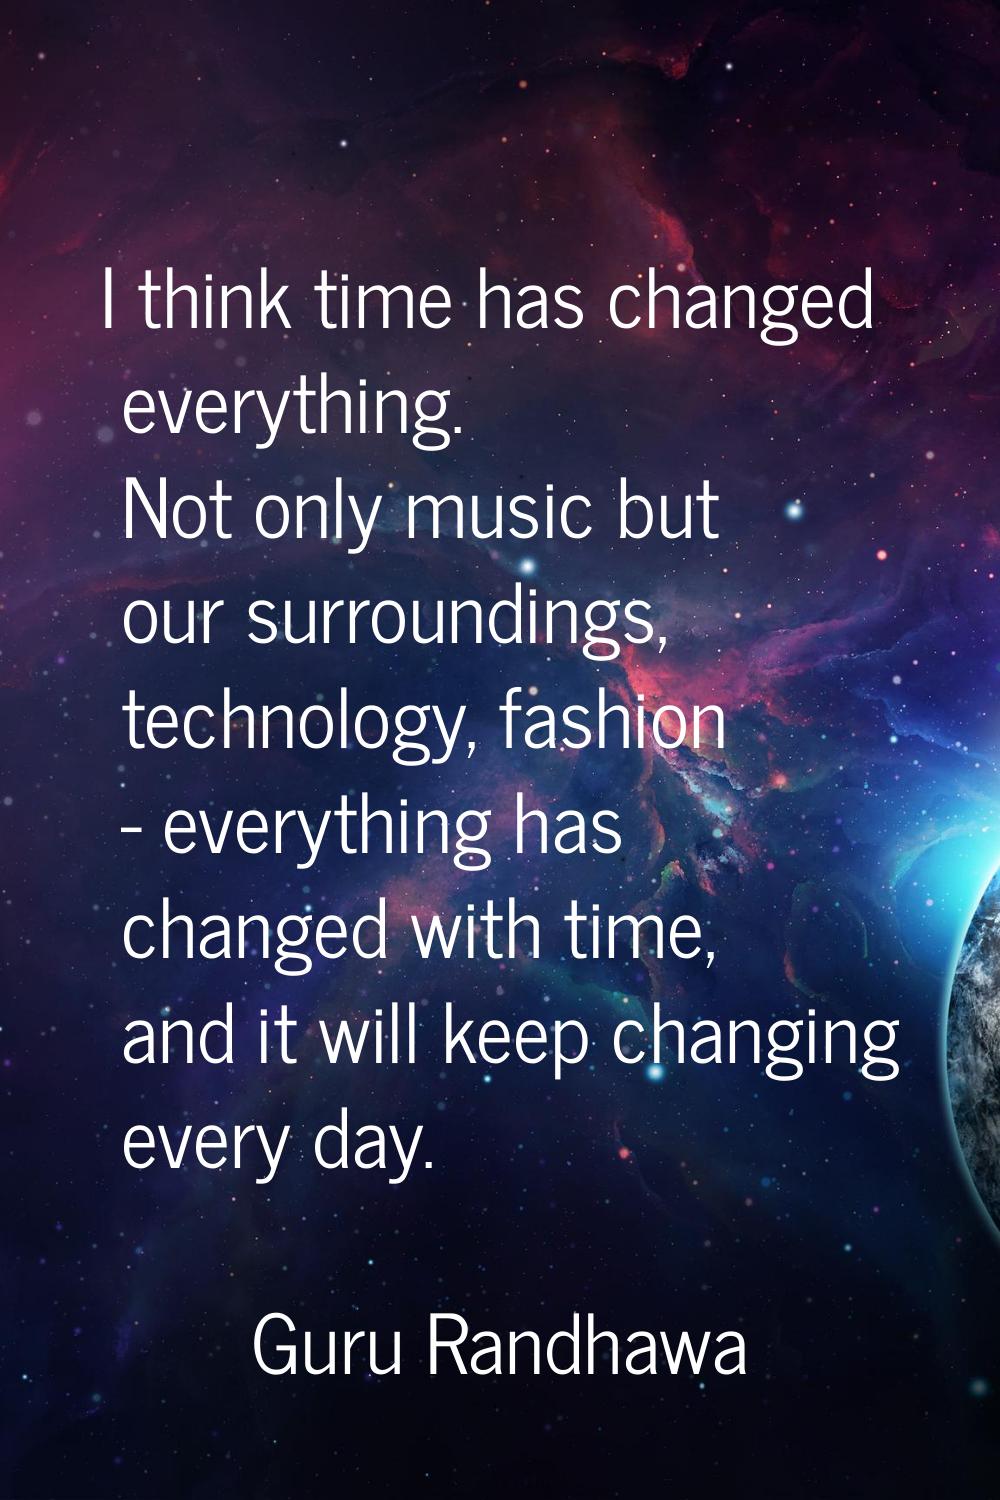 I think time has changed everything. Not only music but our surroundings, technology, fashion - eve